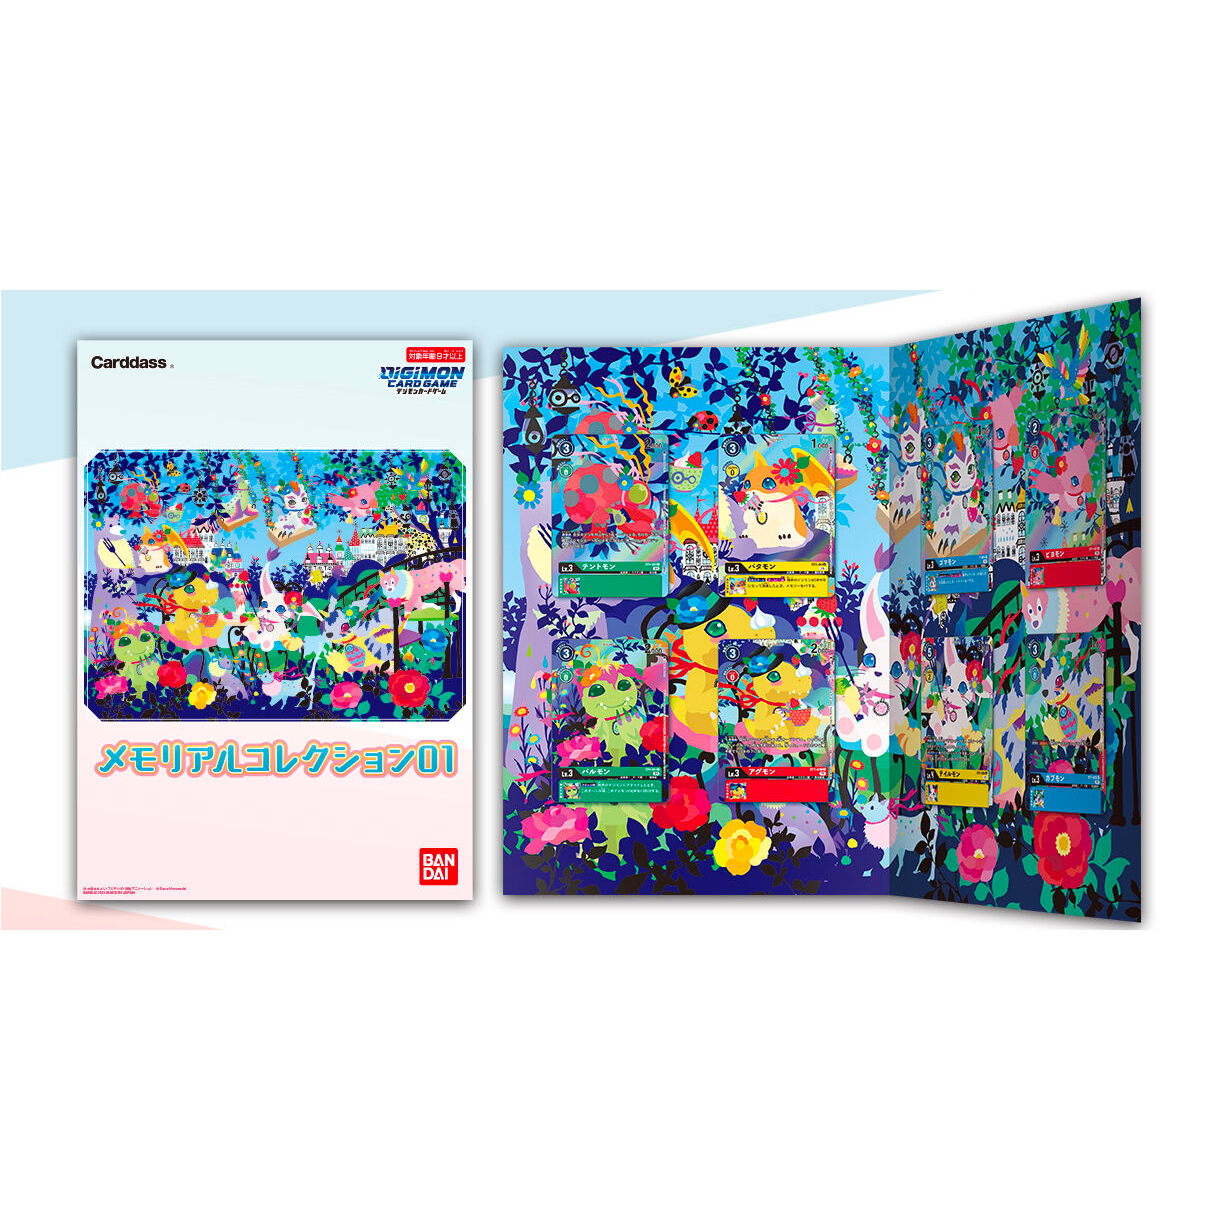 DIGIMON CARD GAME MEMORIAL COLLECTION 01  Release date: 2021